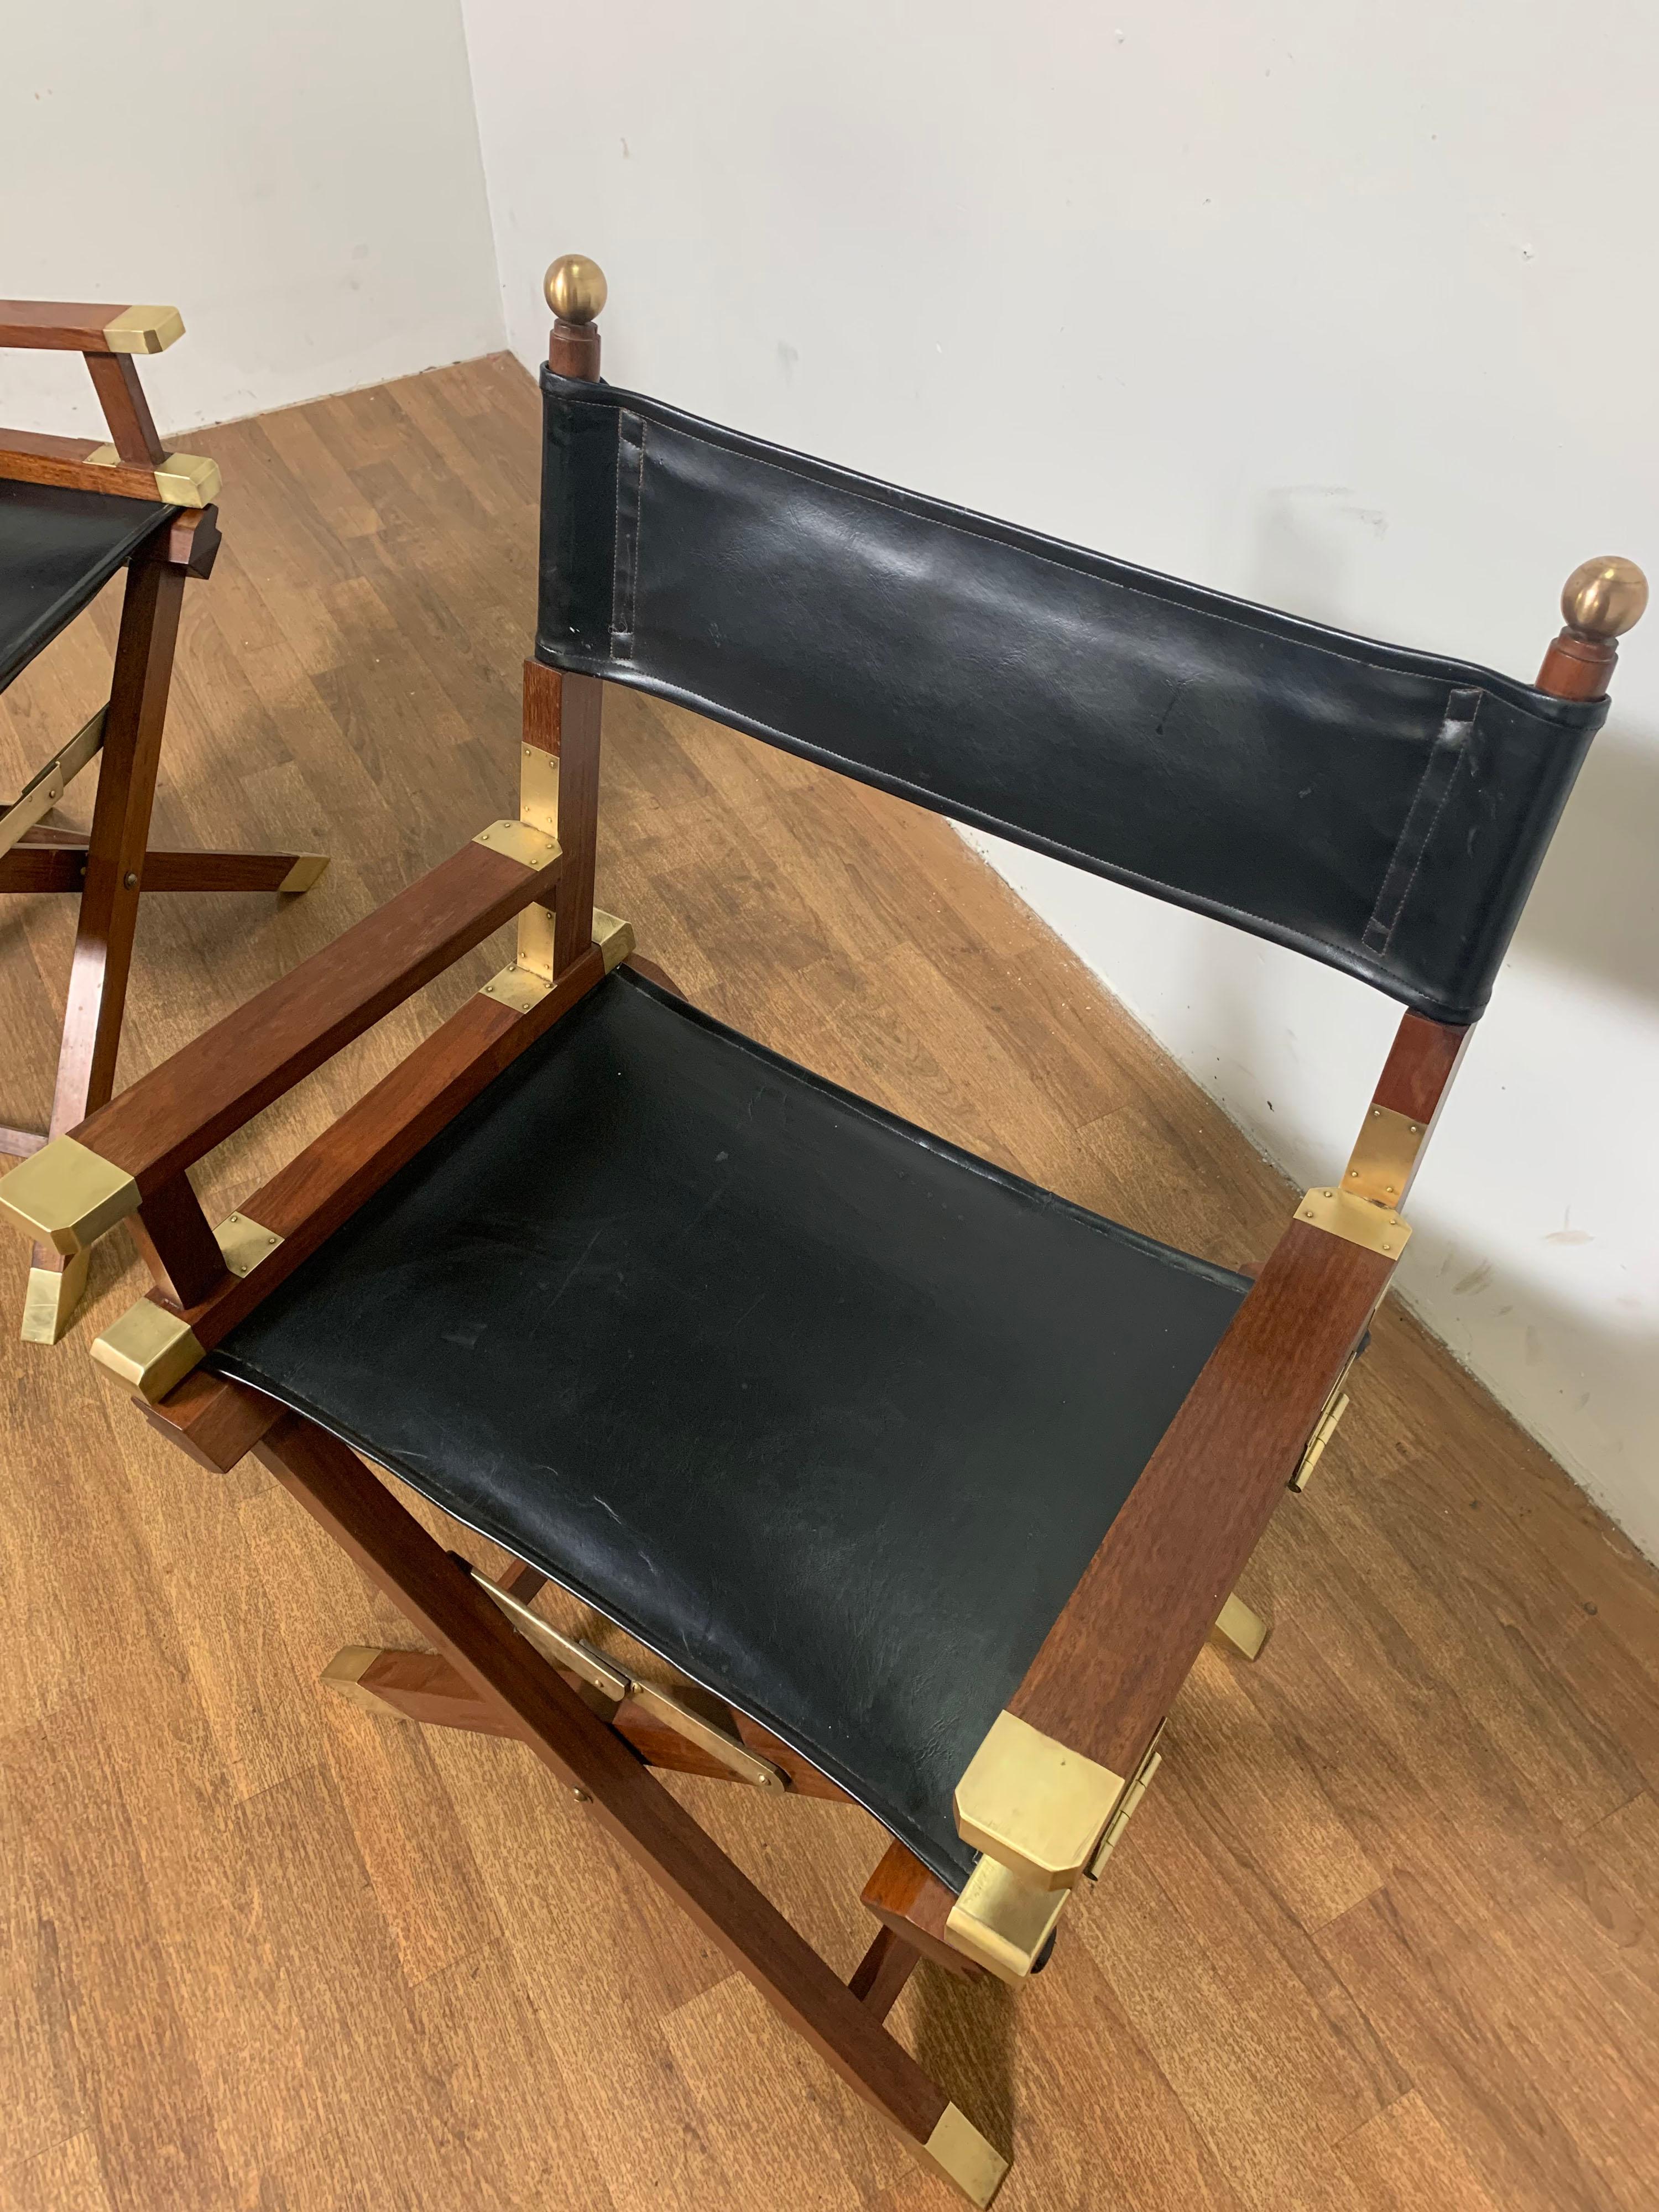 Pair of Bespoke Charlotte Horstmann Rosewood and Brass Campaign Chairs, C. 1950s For Sale 4